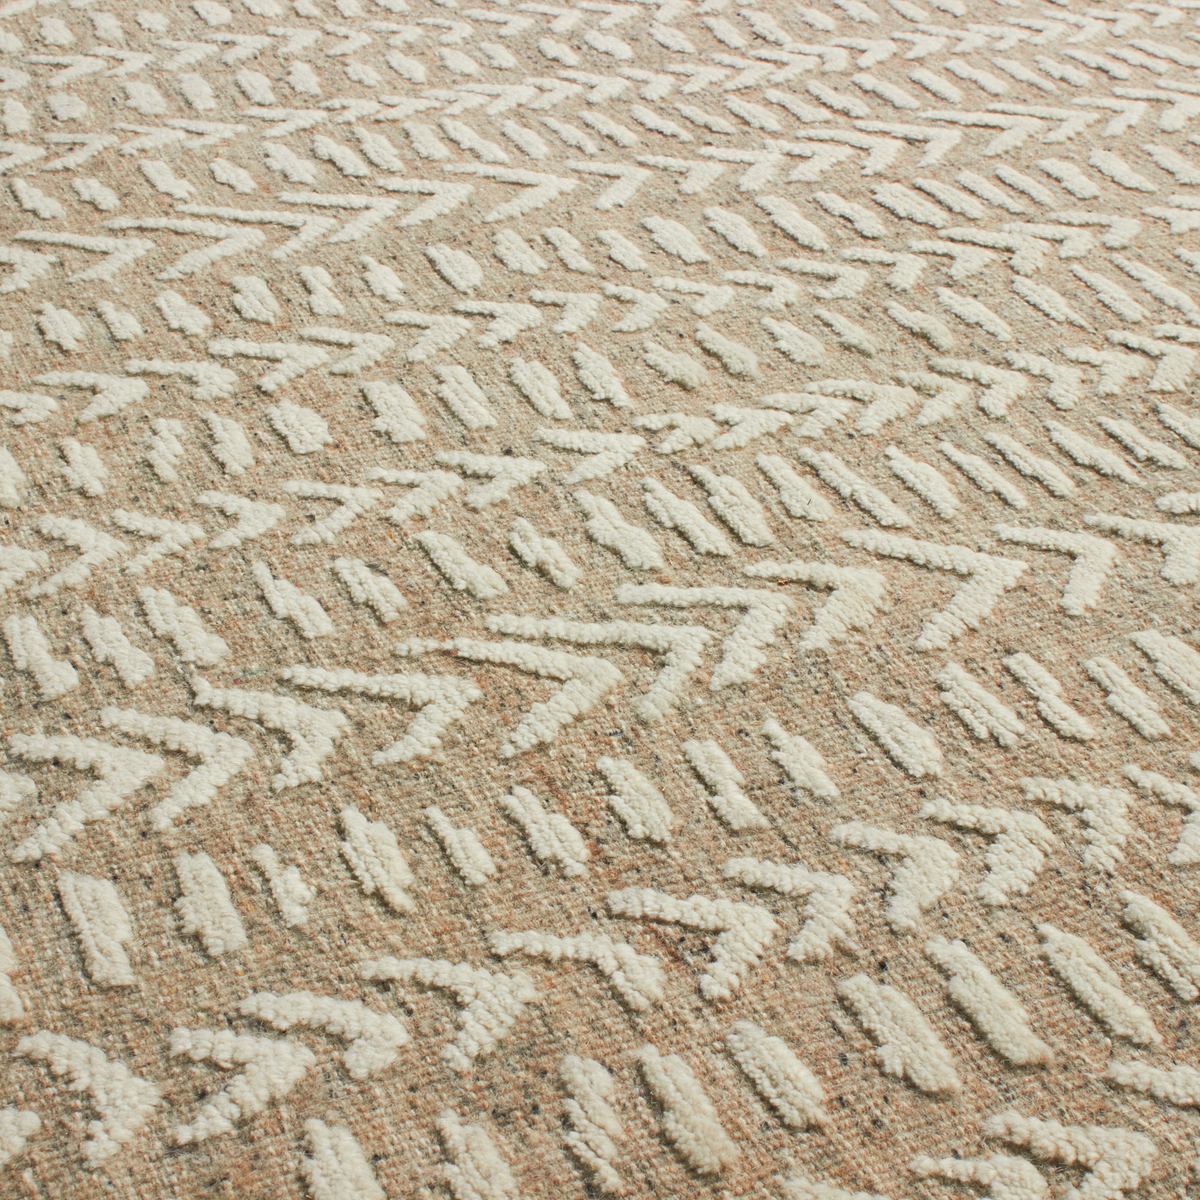 The Moroccan Reimagined Collection features modern interpretations of the quintessential, vintage Moroccan rug.